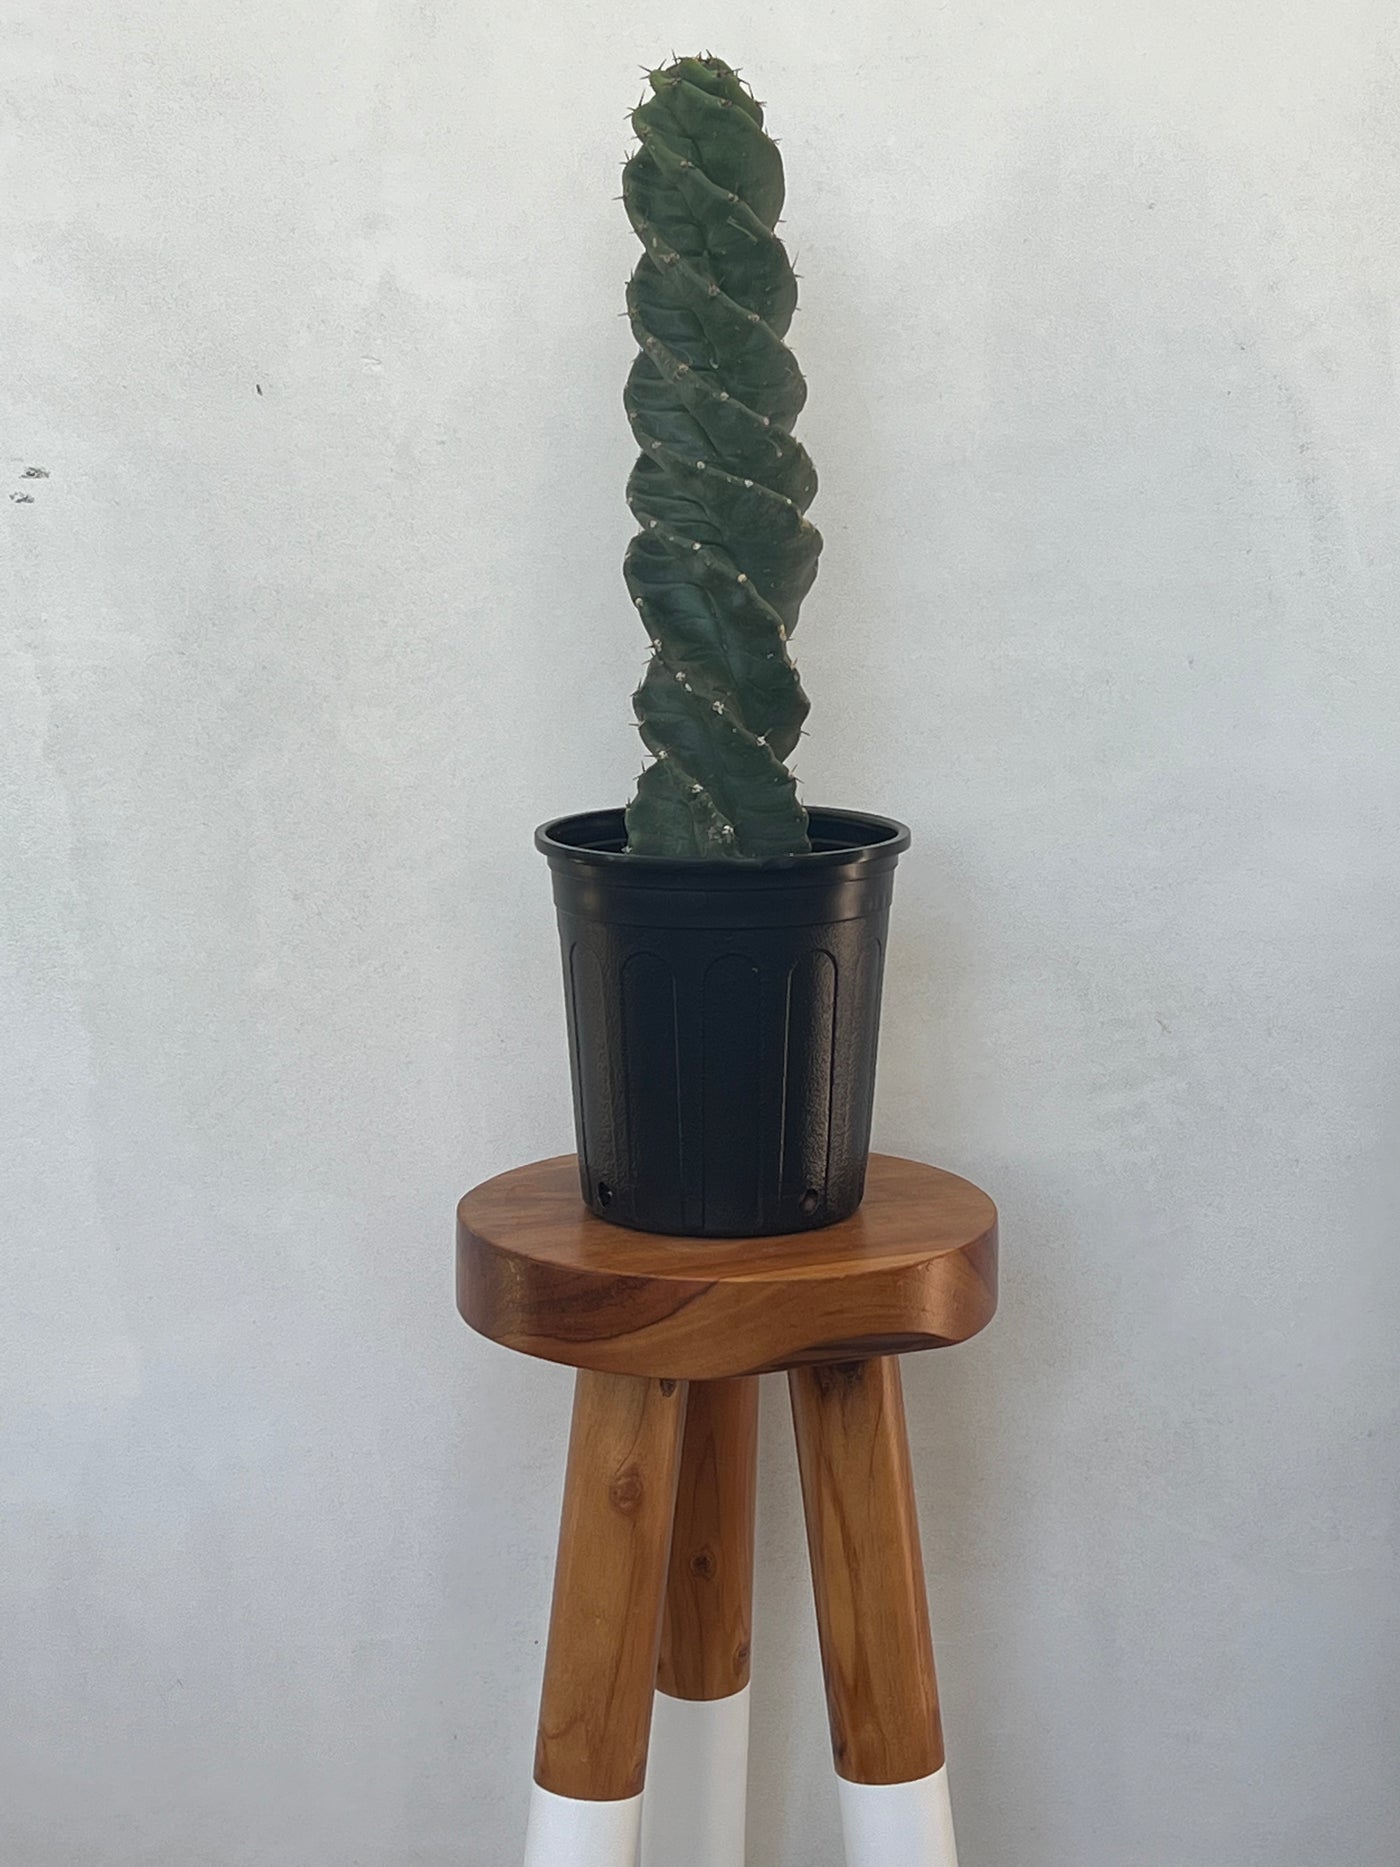 Large and Tall Twisted Cactus for purchase - Plant Vault Encinitas California